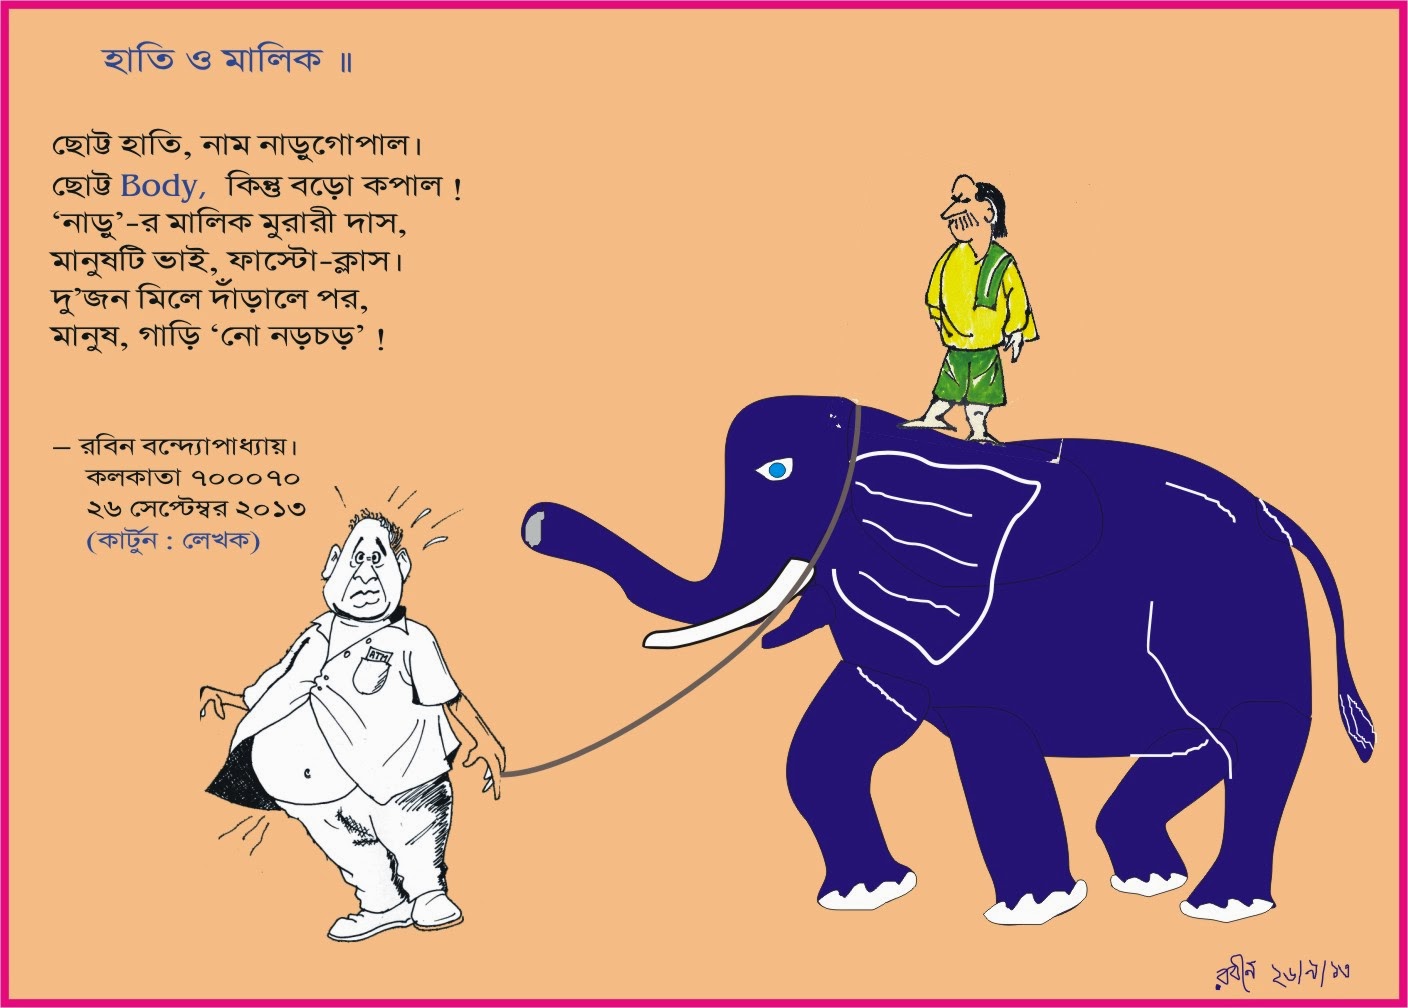 robinscreations: The oddities of life in my nonsense rhymes in Bengali !